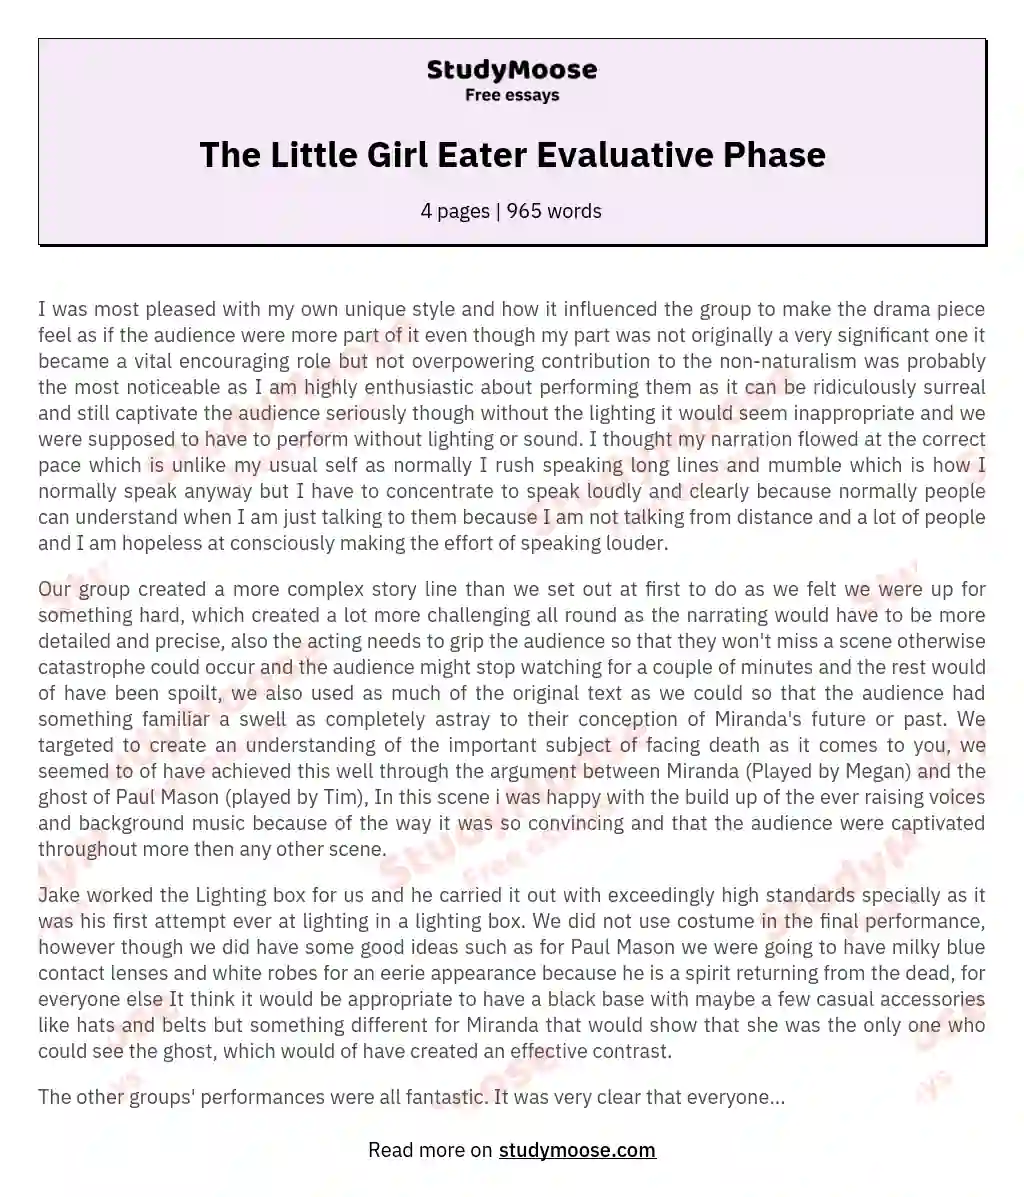 The Little Girl Eater Evaluative Phase essay